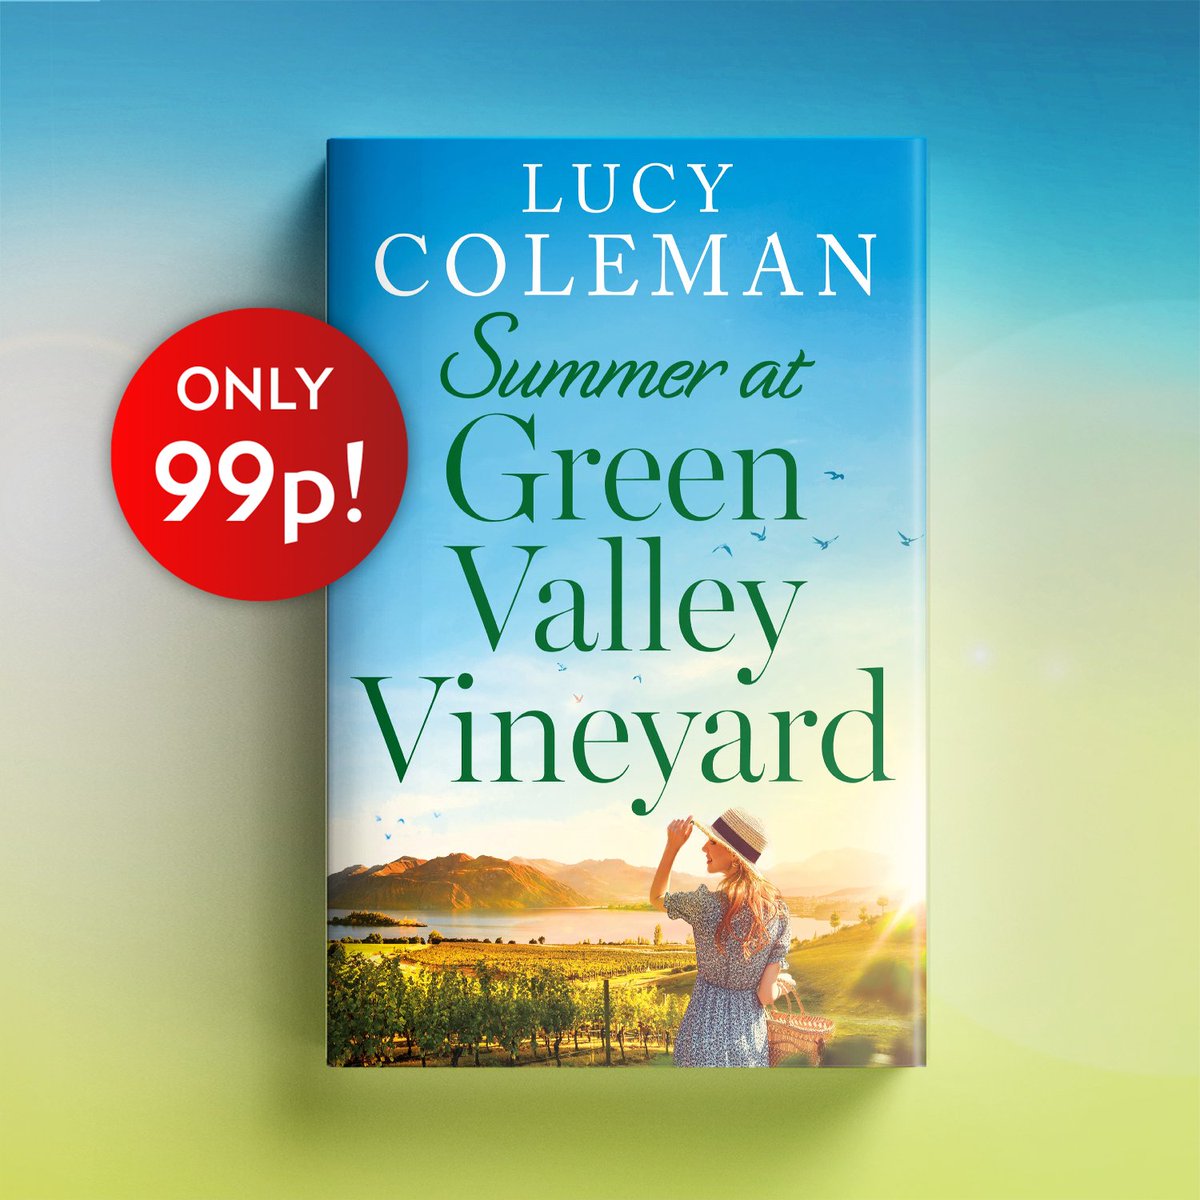 'A deep love story... I loved it... Just a fab read with a perfect ending' Reader Review, ⭐⭐⭐⭐⭐ 'Summer at Green Valley Vineyard' by bestselling @lucycolemanauth is only 99p TODAY! ☀️🍷 Get swept away by this gorgeous summer romance now: loom.ly/wfS6vus